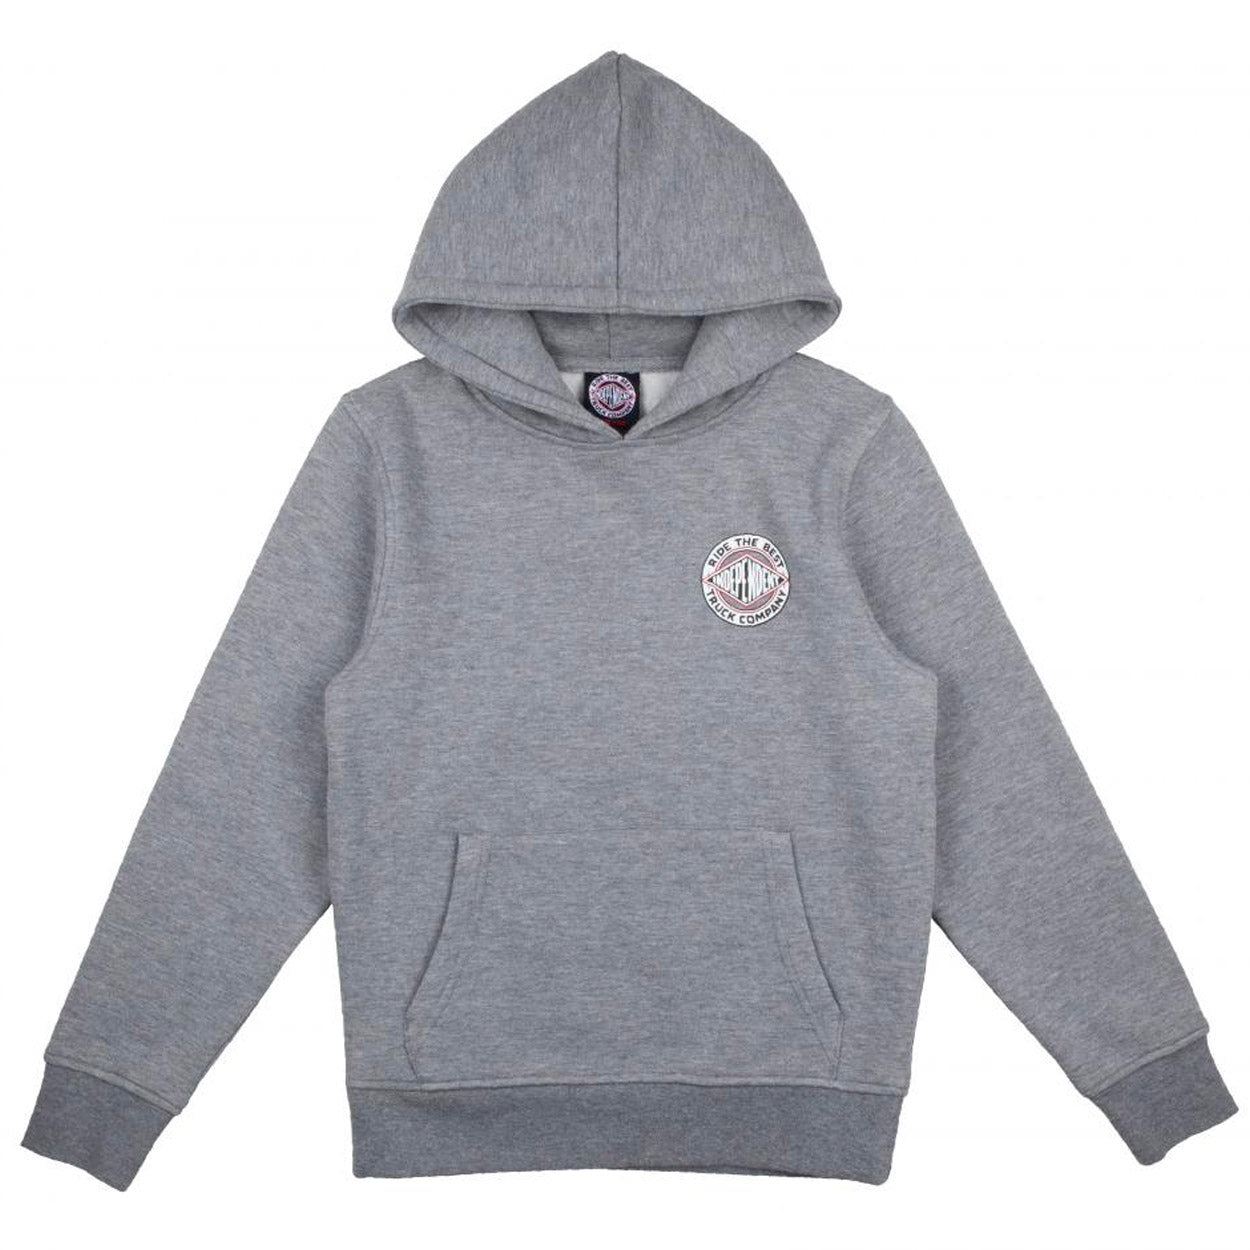 Independent Youth BTG Summit Hood - Heather Grey - Prime Delux Store